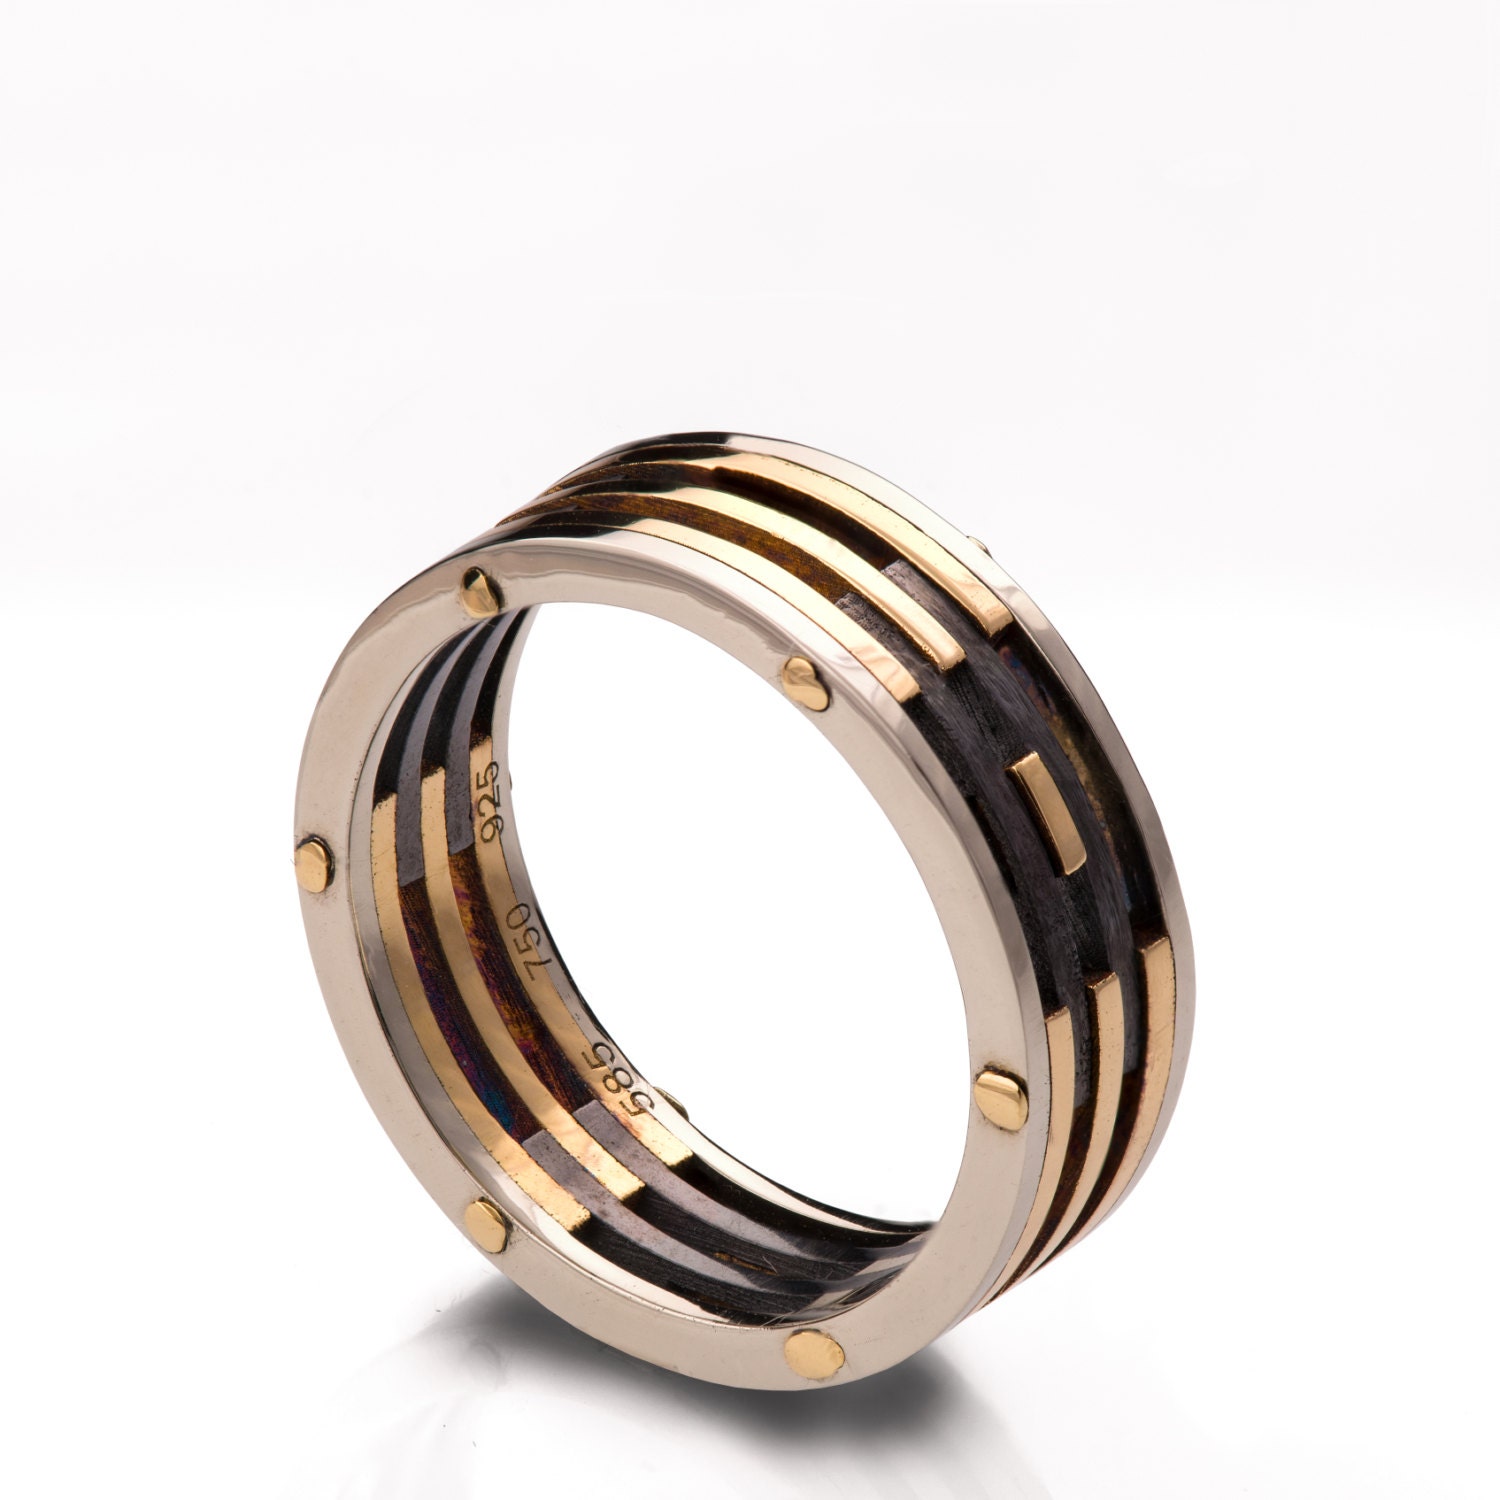 Gold Wedding Band Men's 18K Gold and Oxidized Silver